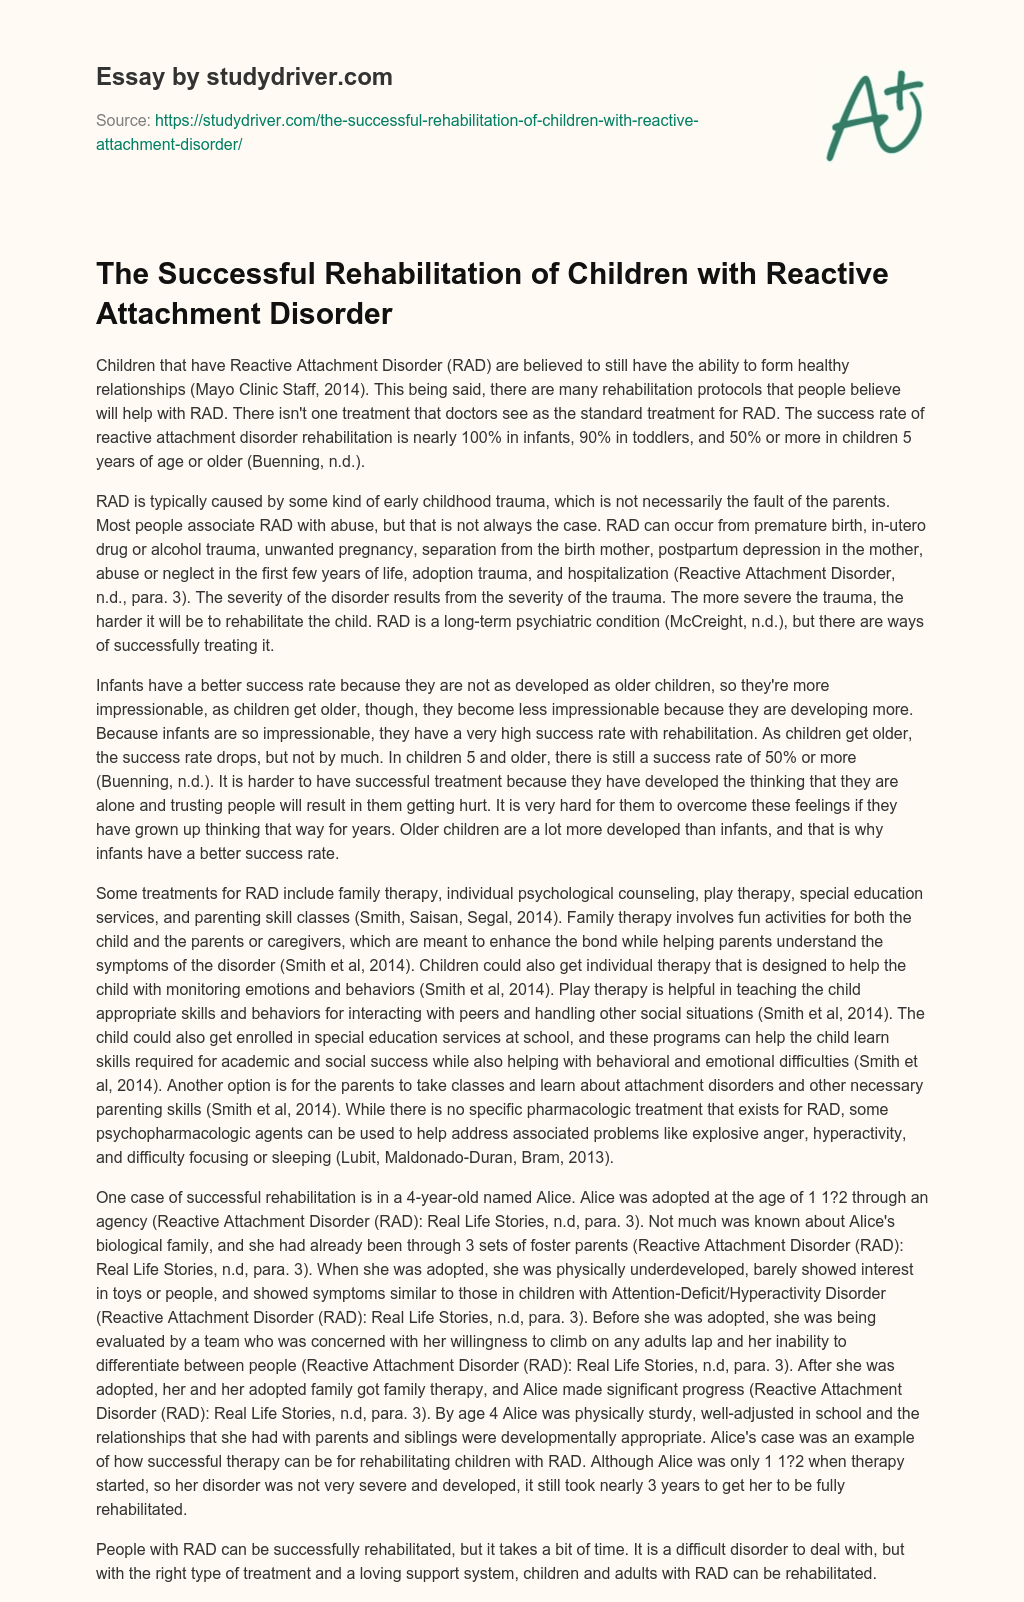 The Successful Rehabilitation of Children with Reactive Attachment Disorder essay